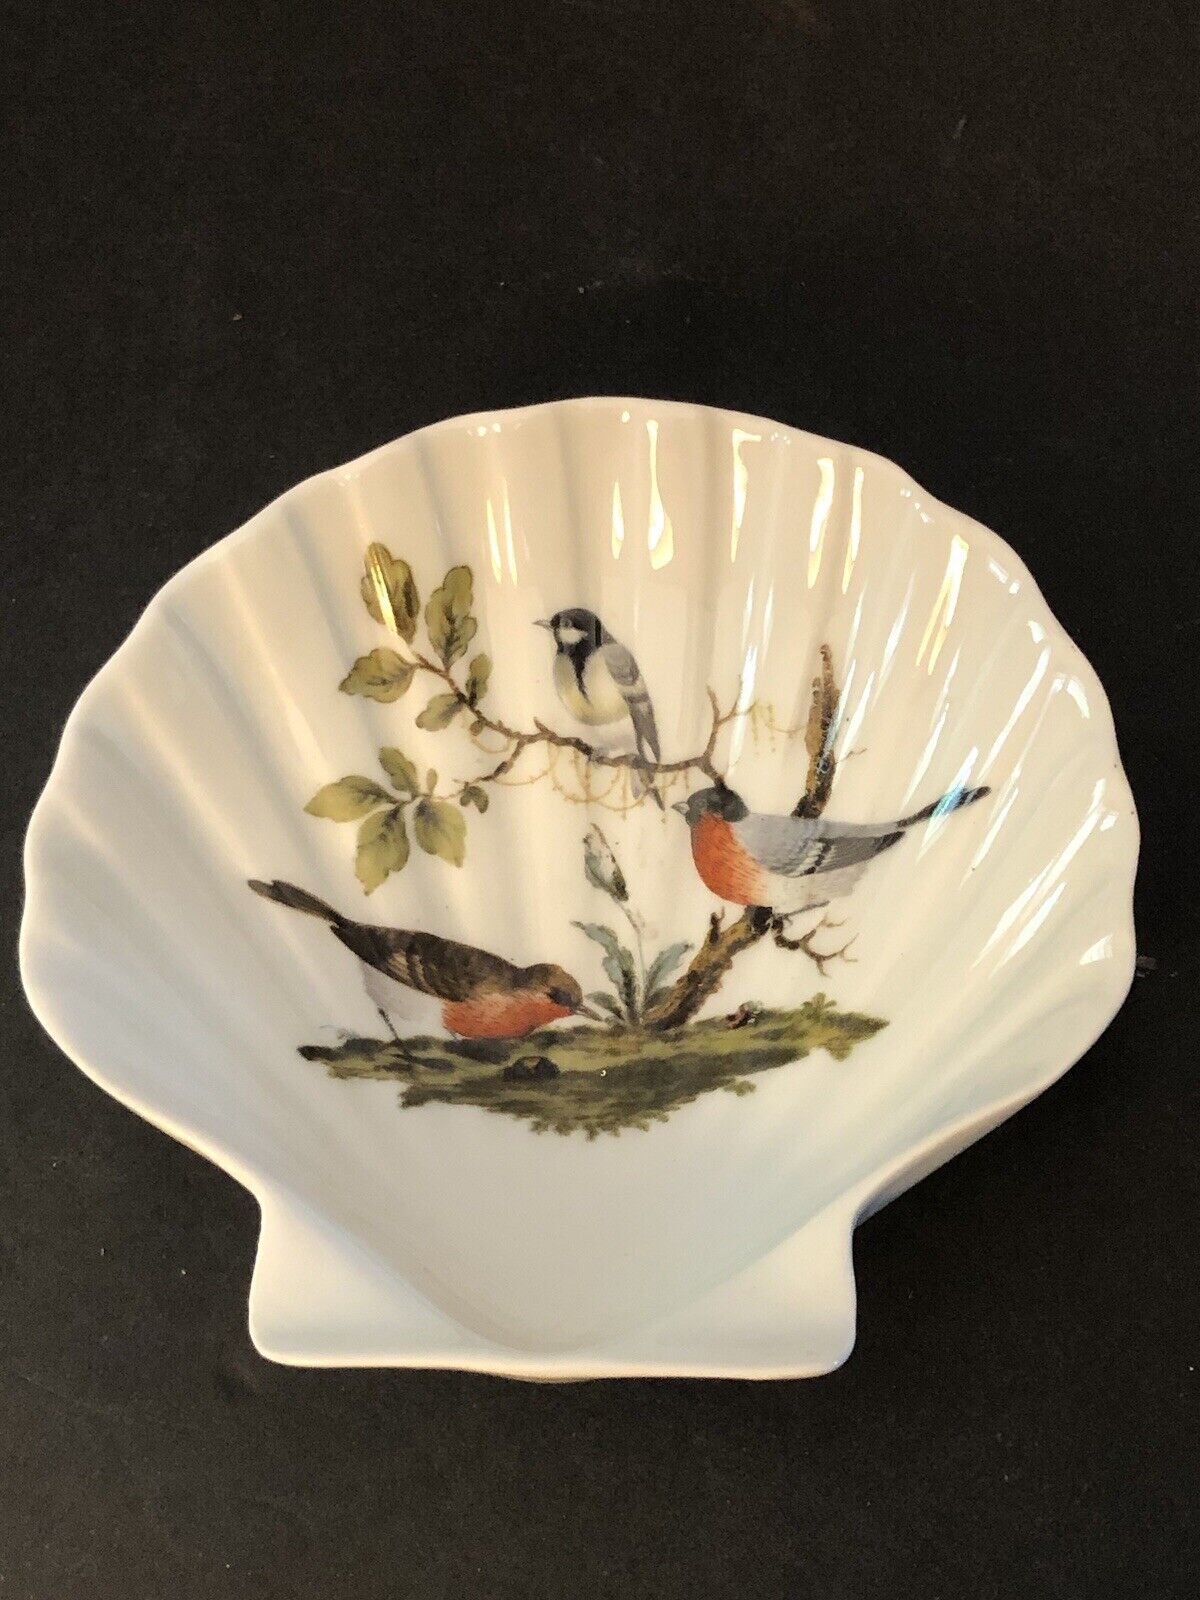 Vintage Limoges Clam Shell Trinket Dish. France. Bird And Nature Images.